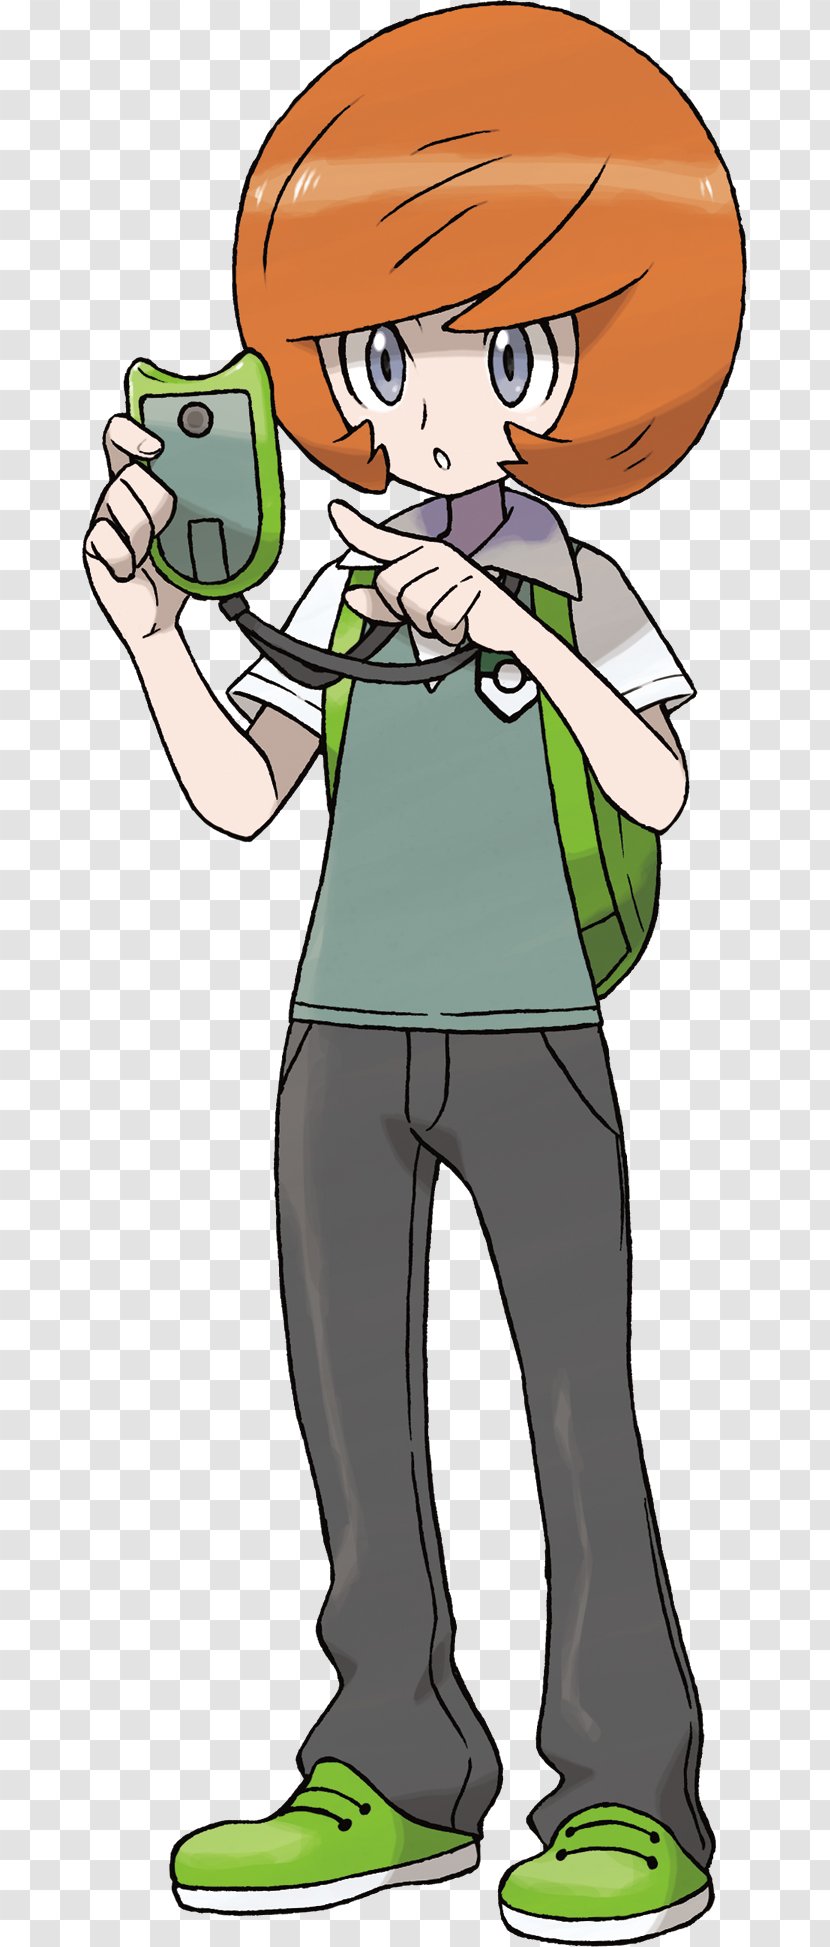 Pokémon X And Y GO Video Game Character - Clothing - Pokemon Go Transparent PNG